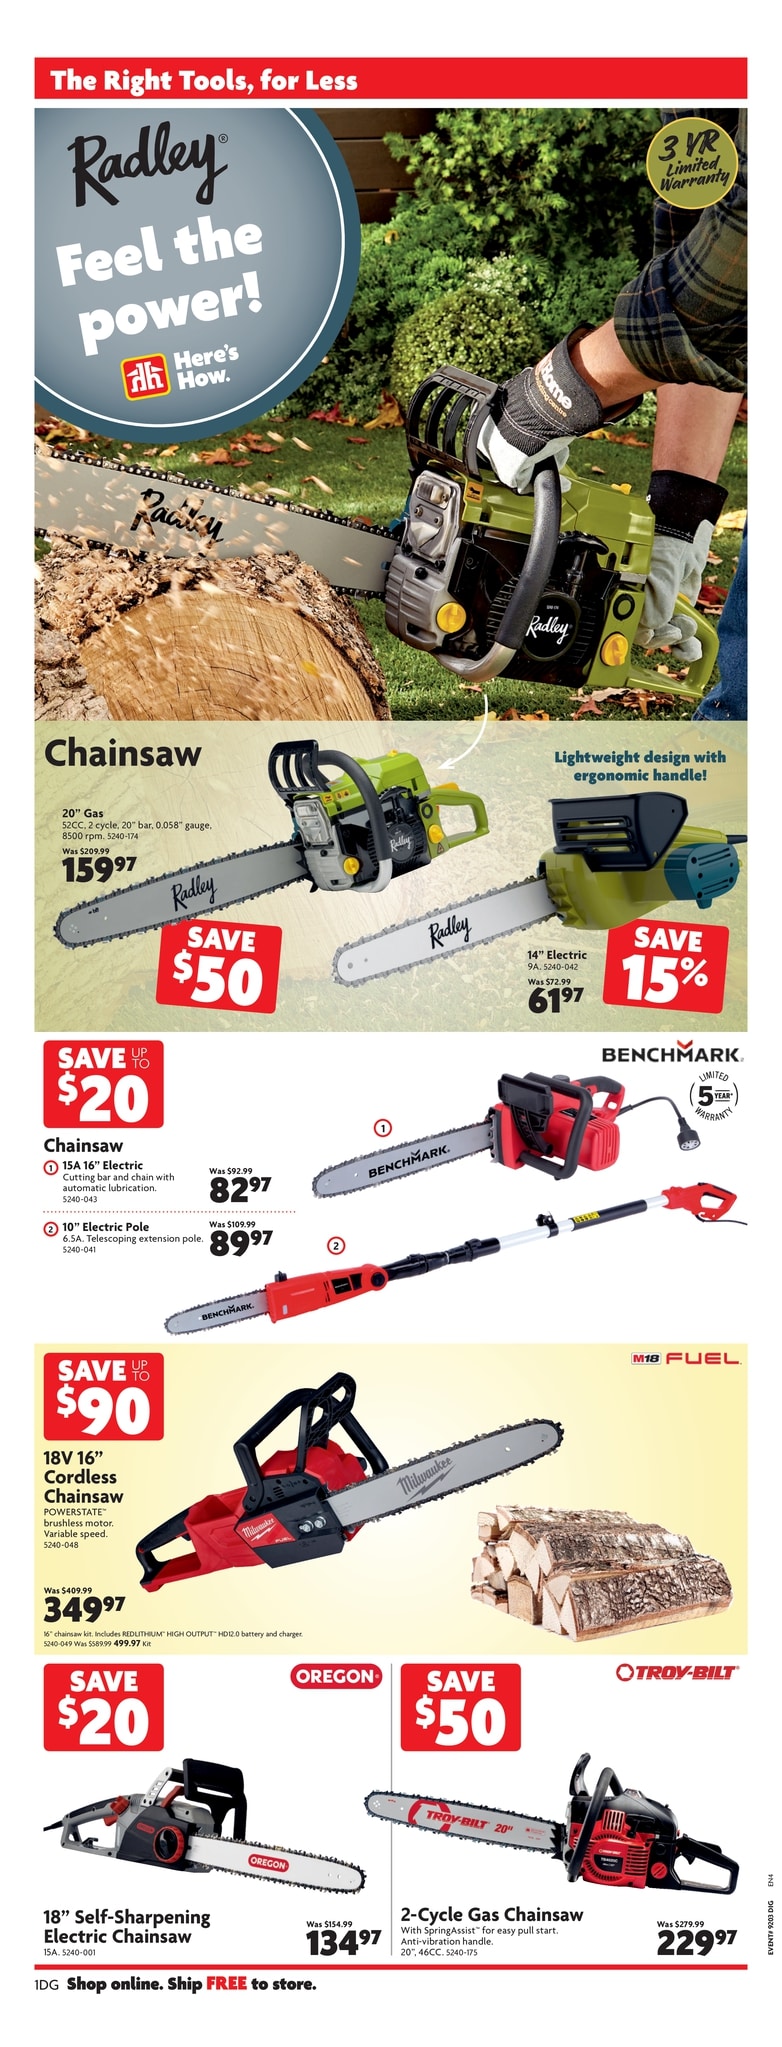 Home Hardware - Weekly Flyer Specials - Page 9